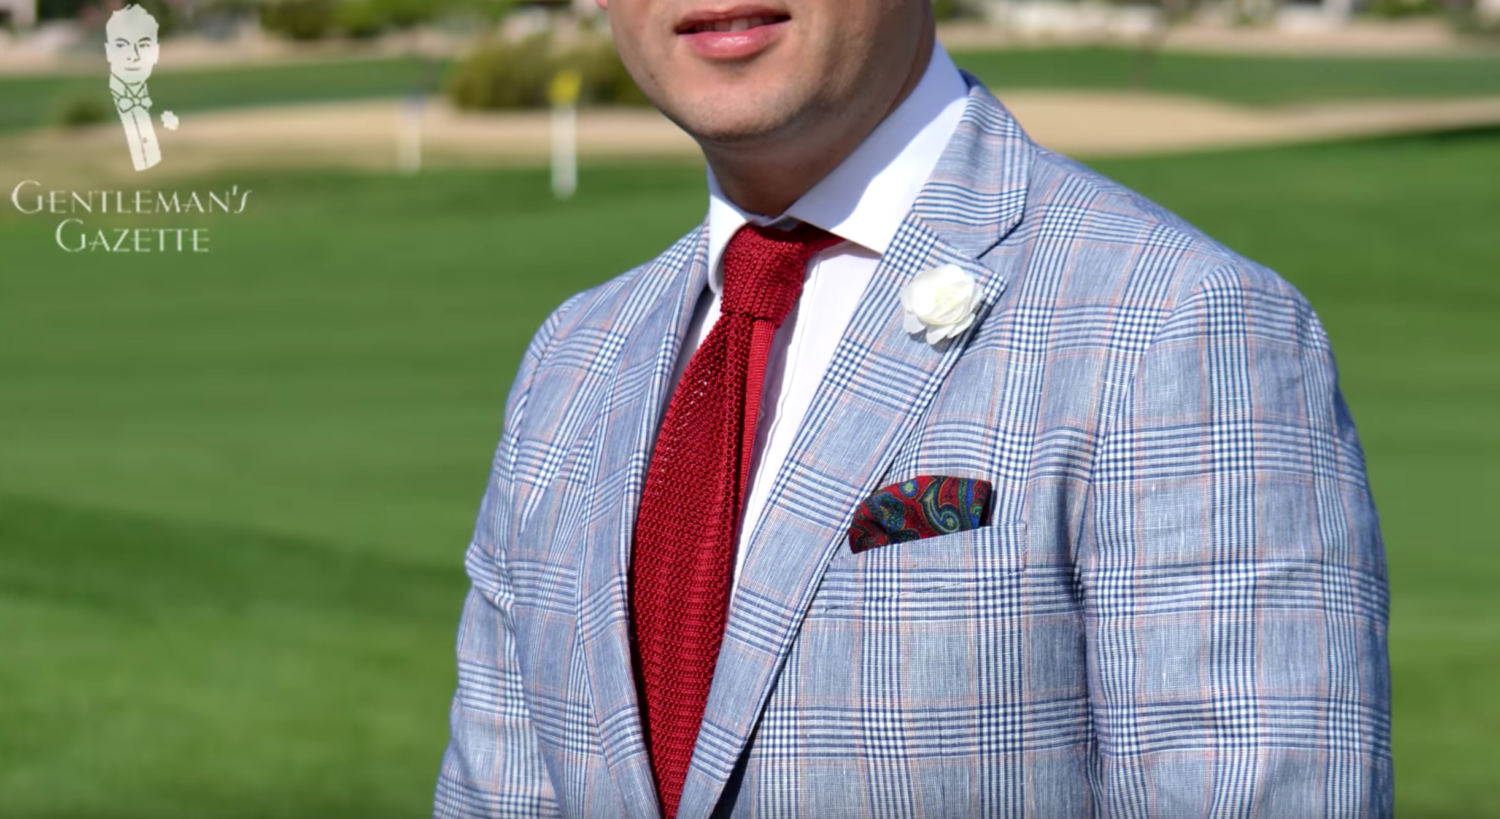 Raphael wearing a Gagliardi Glen check Summer Sportcoat with Knit Tie in Solid Red Silk, White Spray Rose Boutonniere and Pocket Square from Fort Belvedere